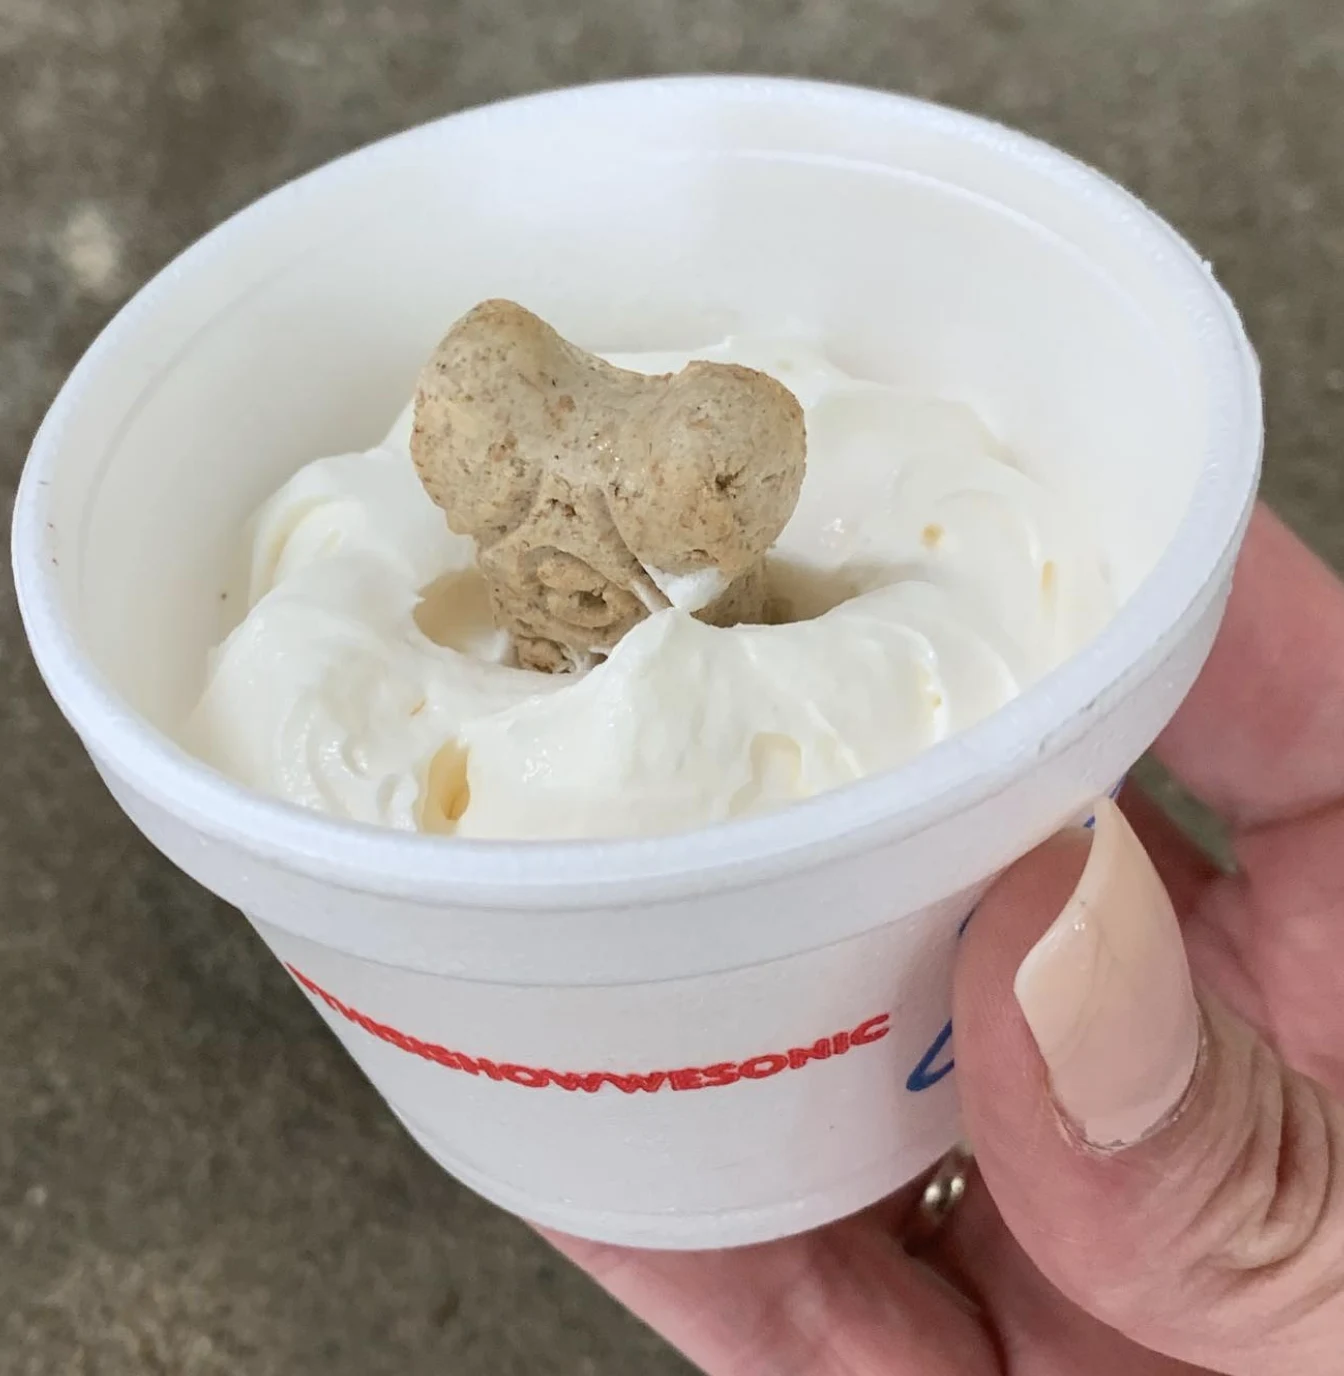 SONIC Has A Secret Pup Cup. Here's How You Can Order One for Free.